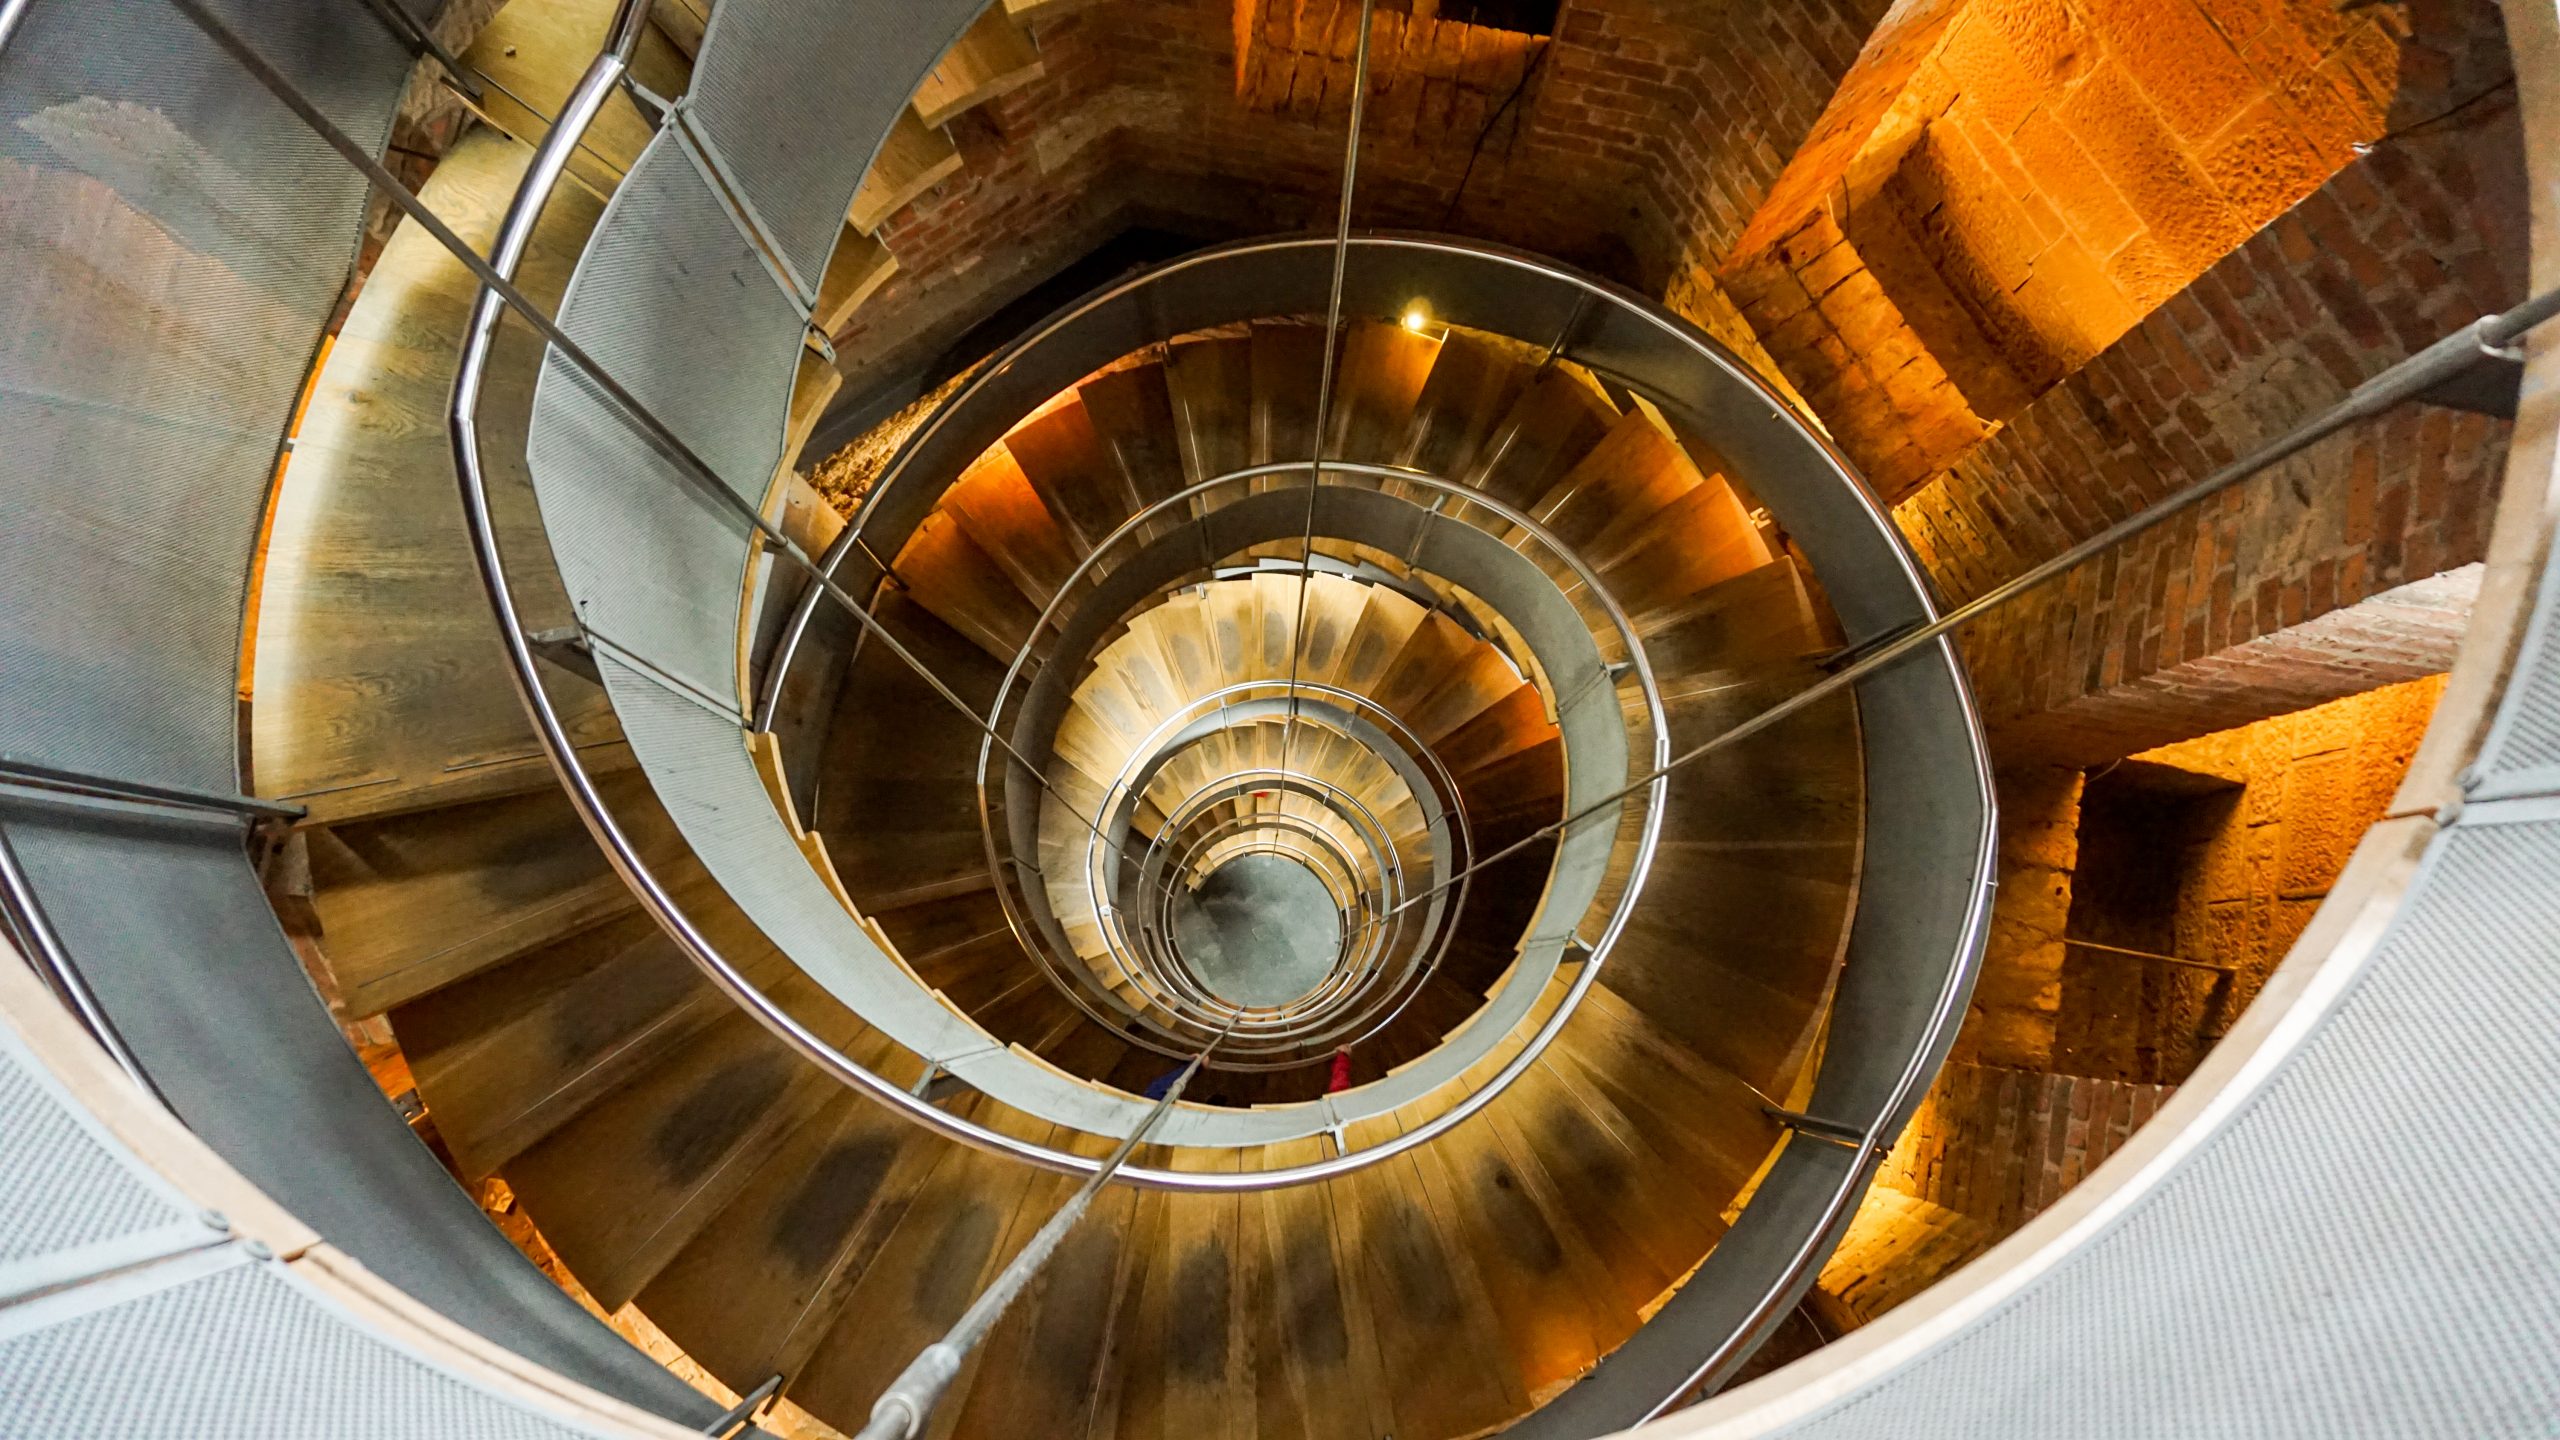 The Lighthouse staircase